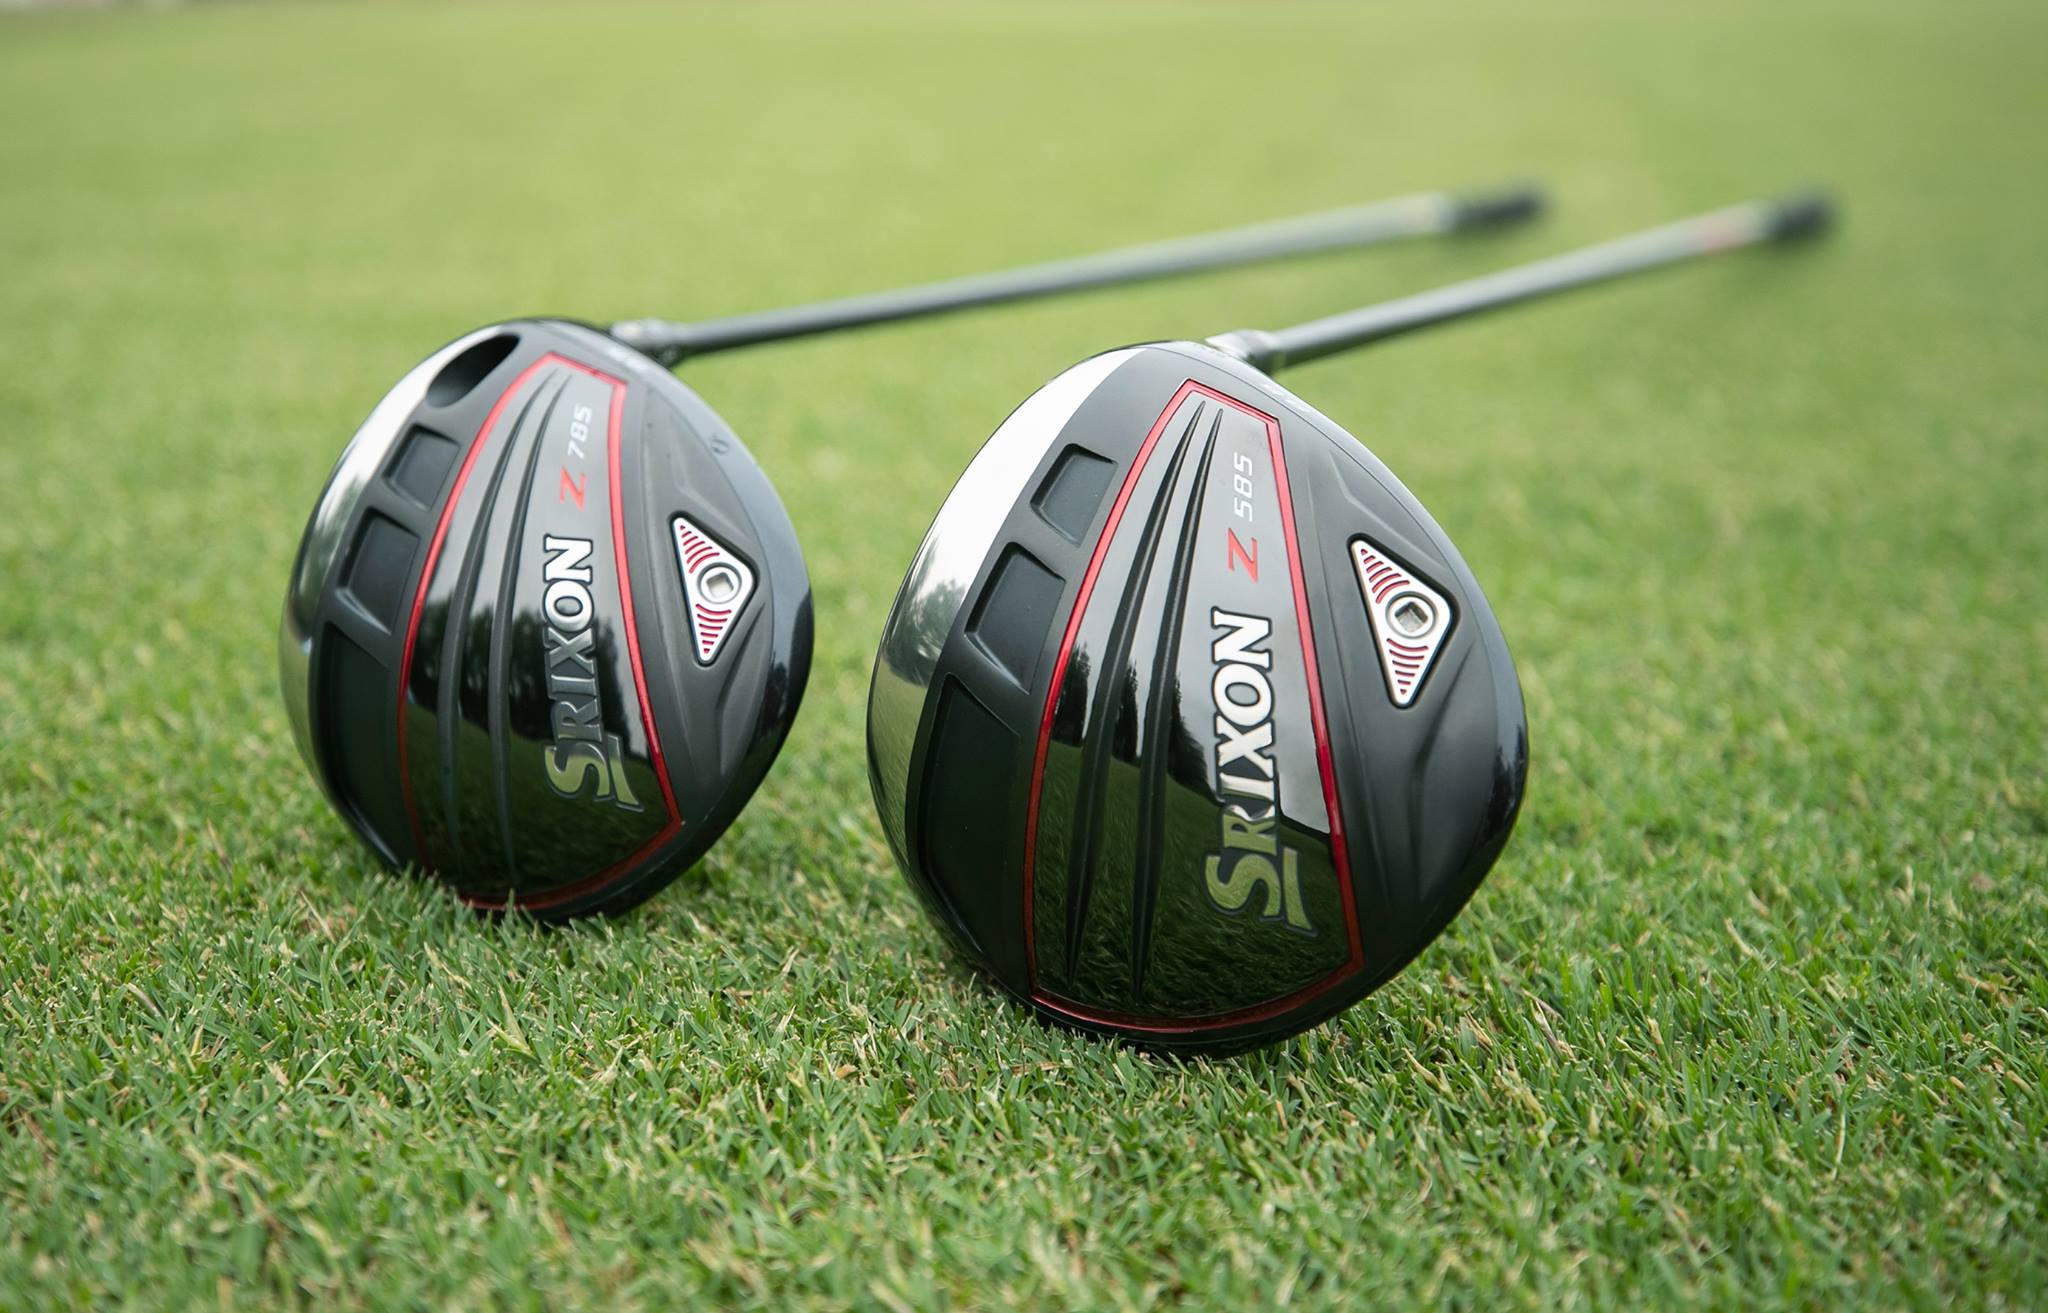 Srixon Golf Demo Day at Carls Golfland - March 2nd